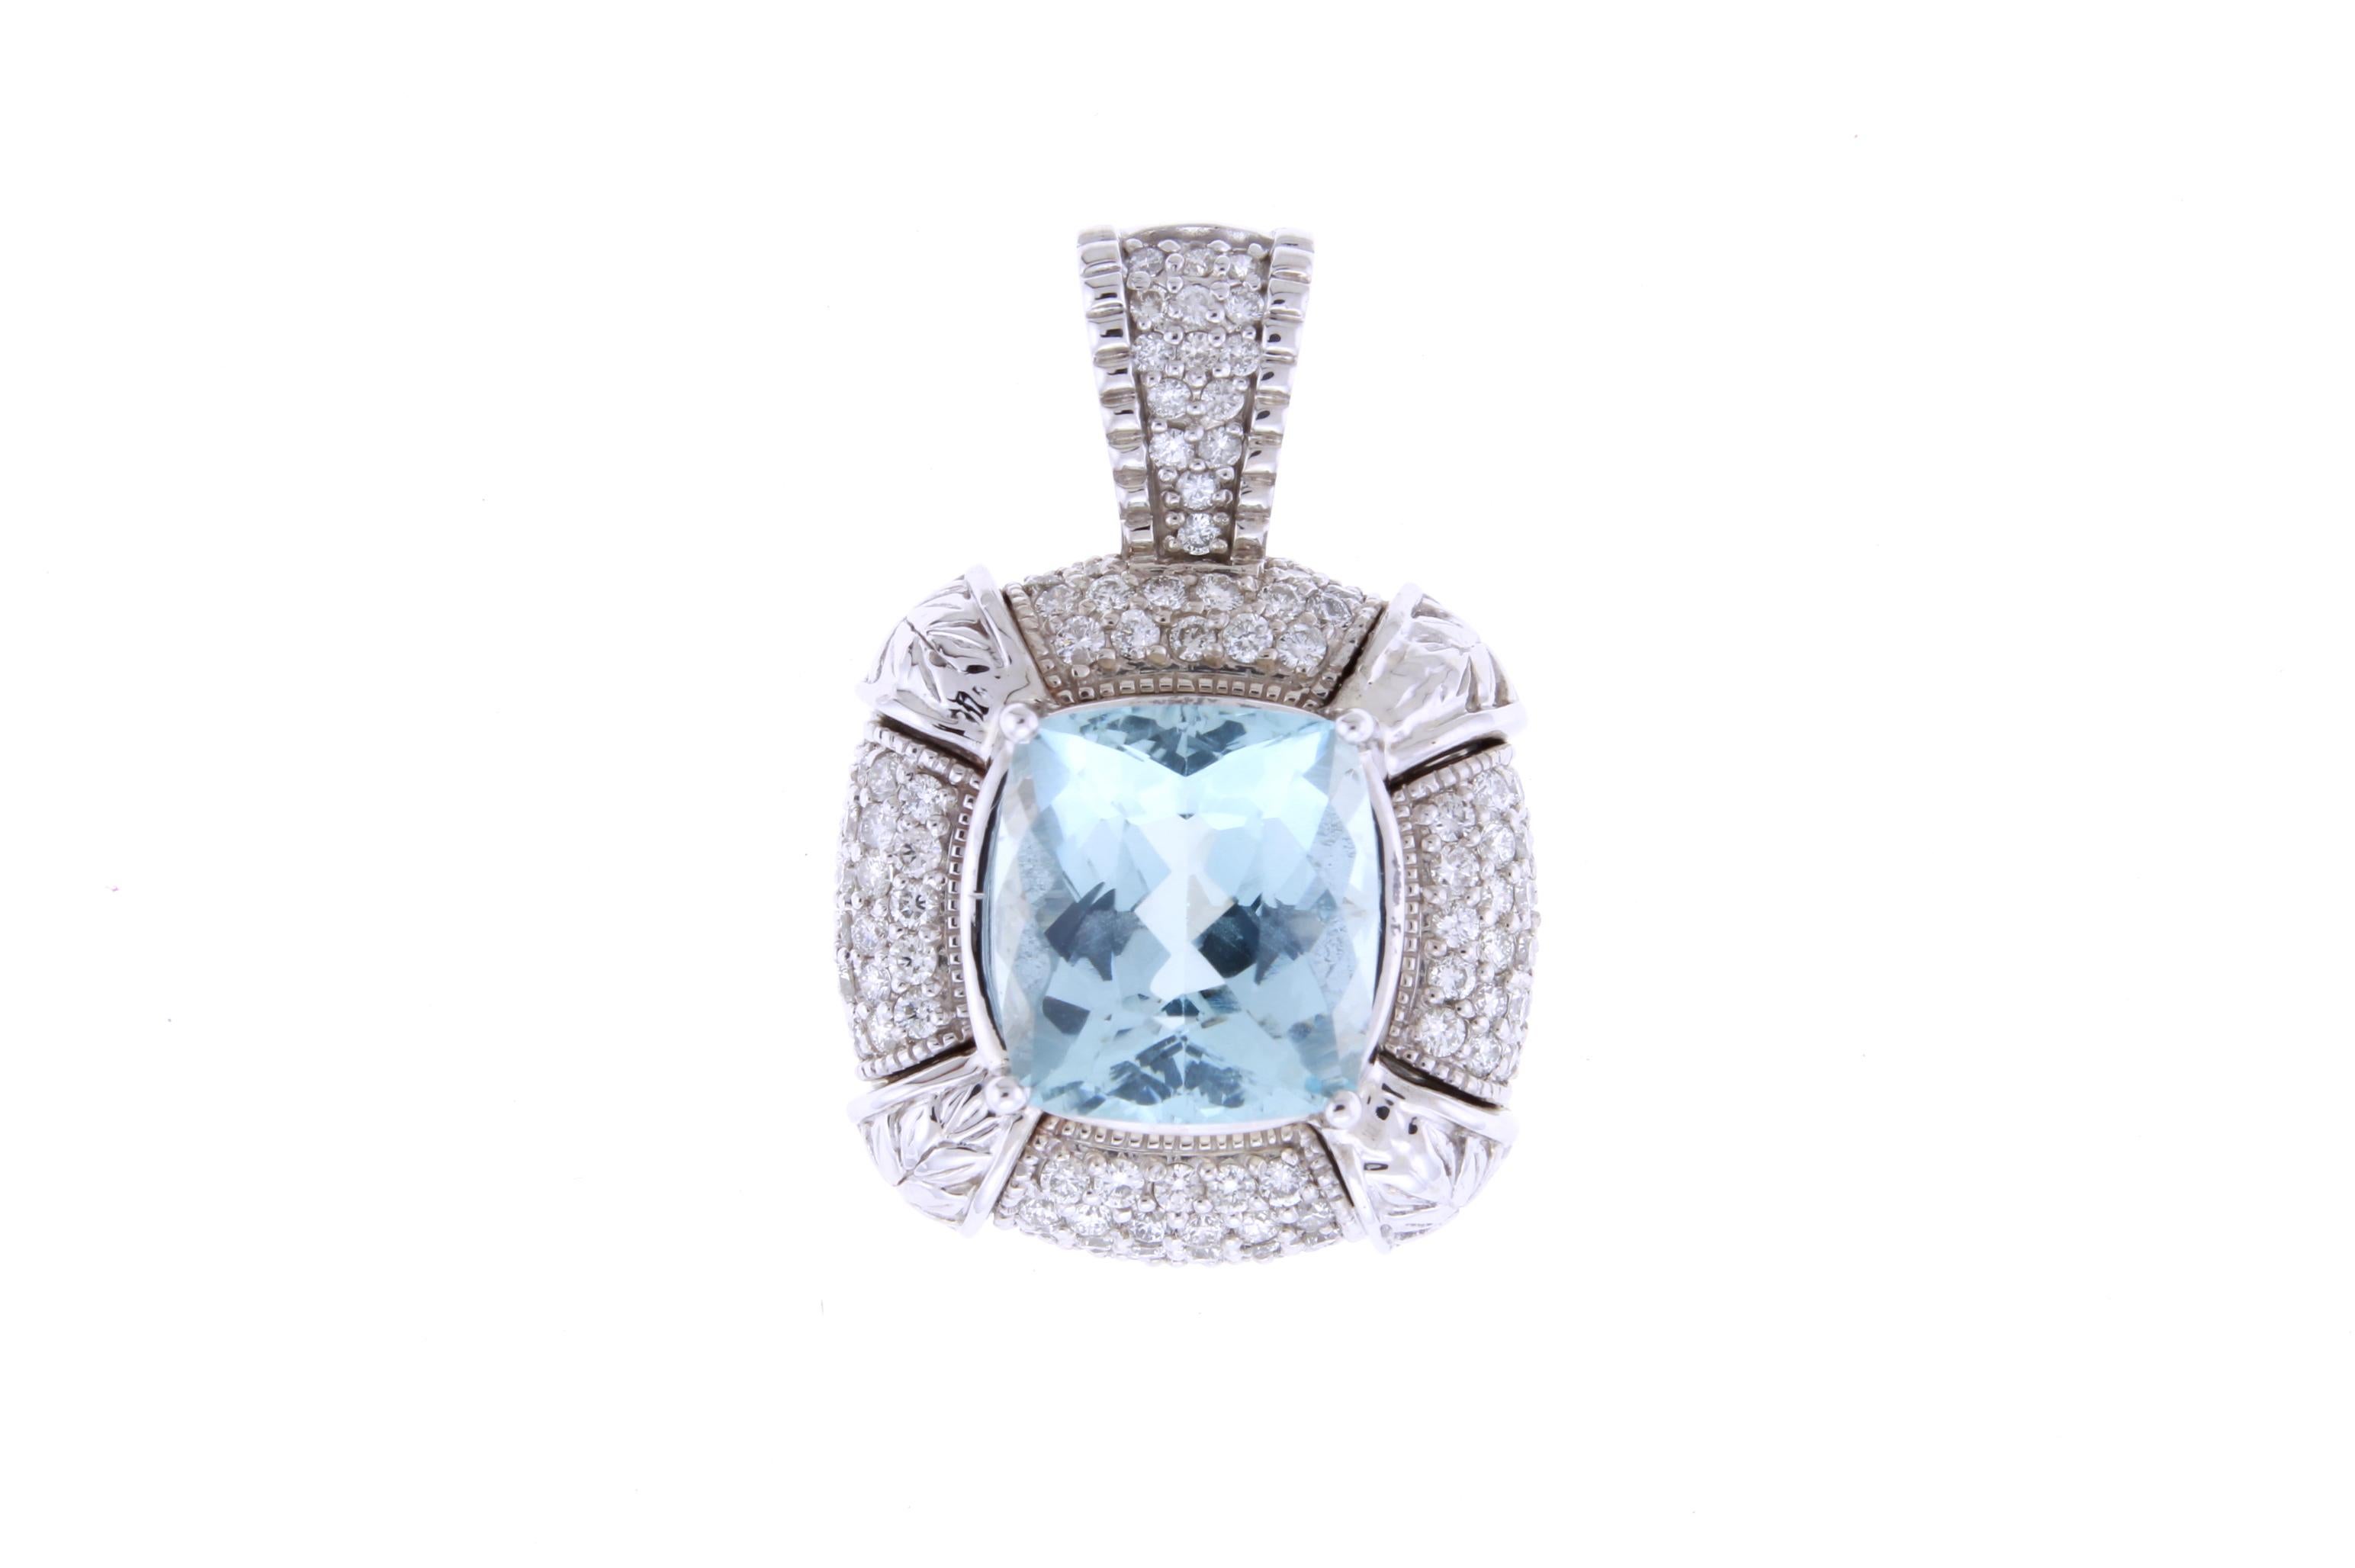 Material: 14k White Gold 
Gemstone:  8.54 Carat Cushion Cut Aquamarine Pendant measuring 12.8 x 11.8 mm
Diamond:  98 Round Diamonds at 0.52 Carats.  SI Quality /  H-I Color
Chain:  18 inch chain.

Fine one-of-a kind craftsmanship meets incredible